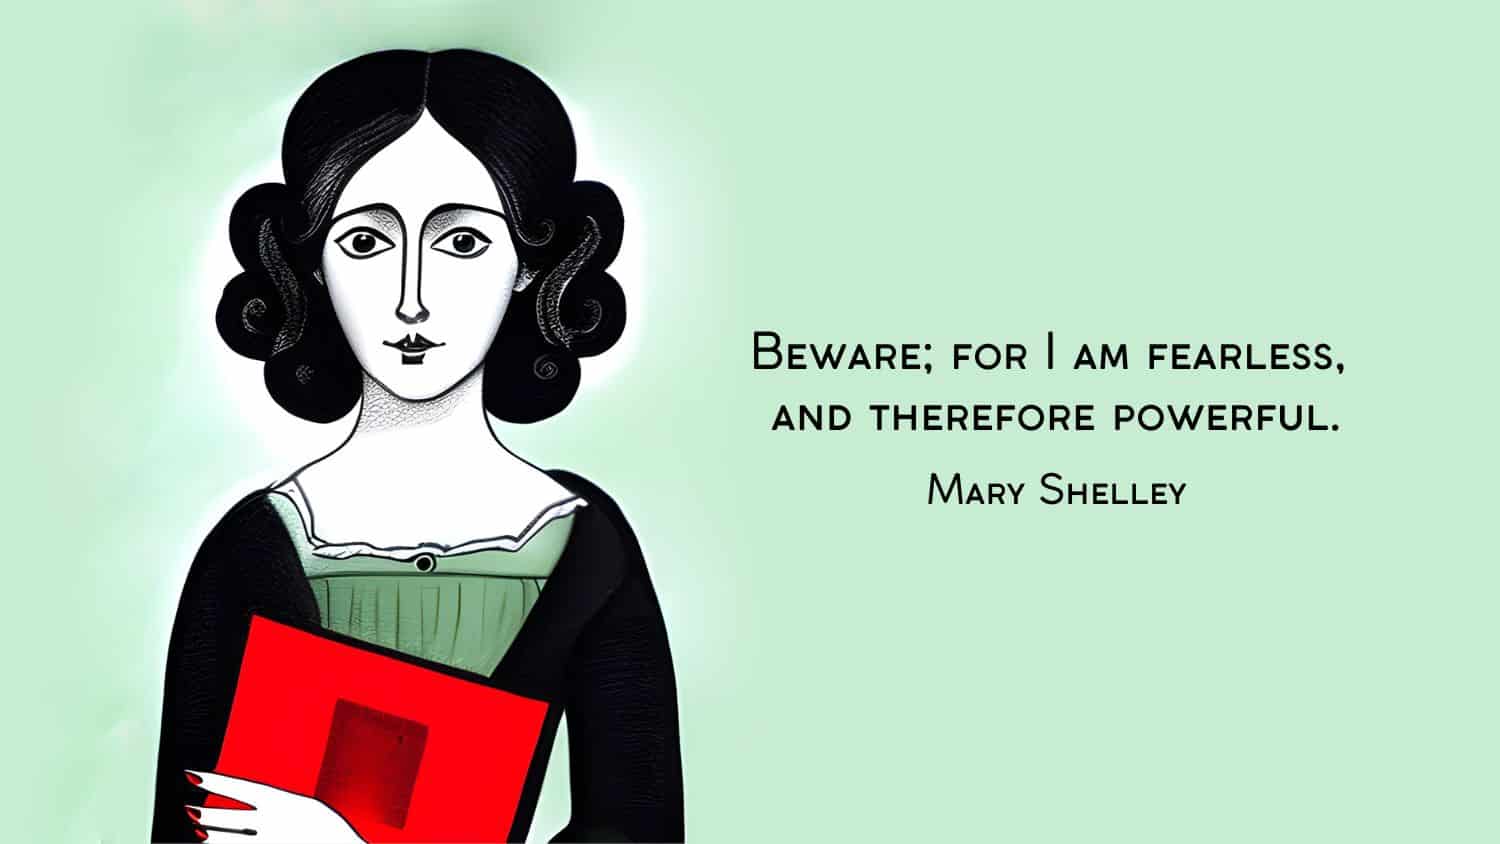 Mary Shelley drawing and quote